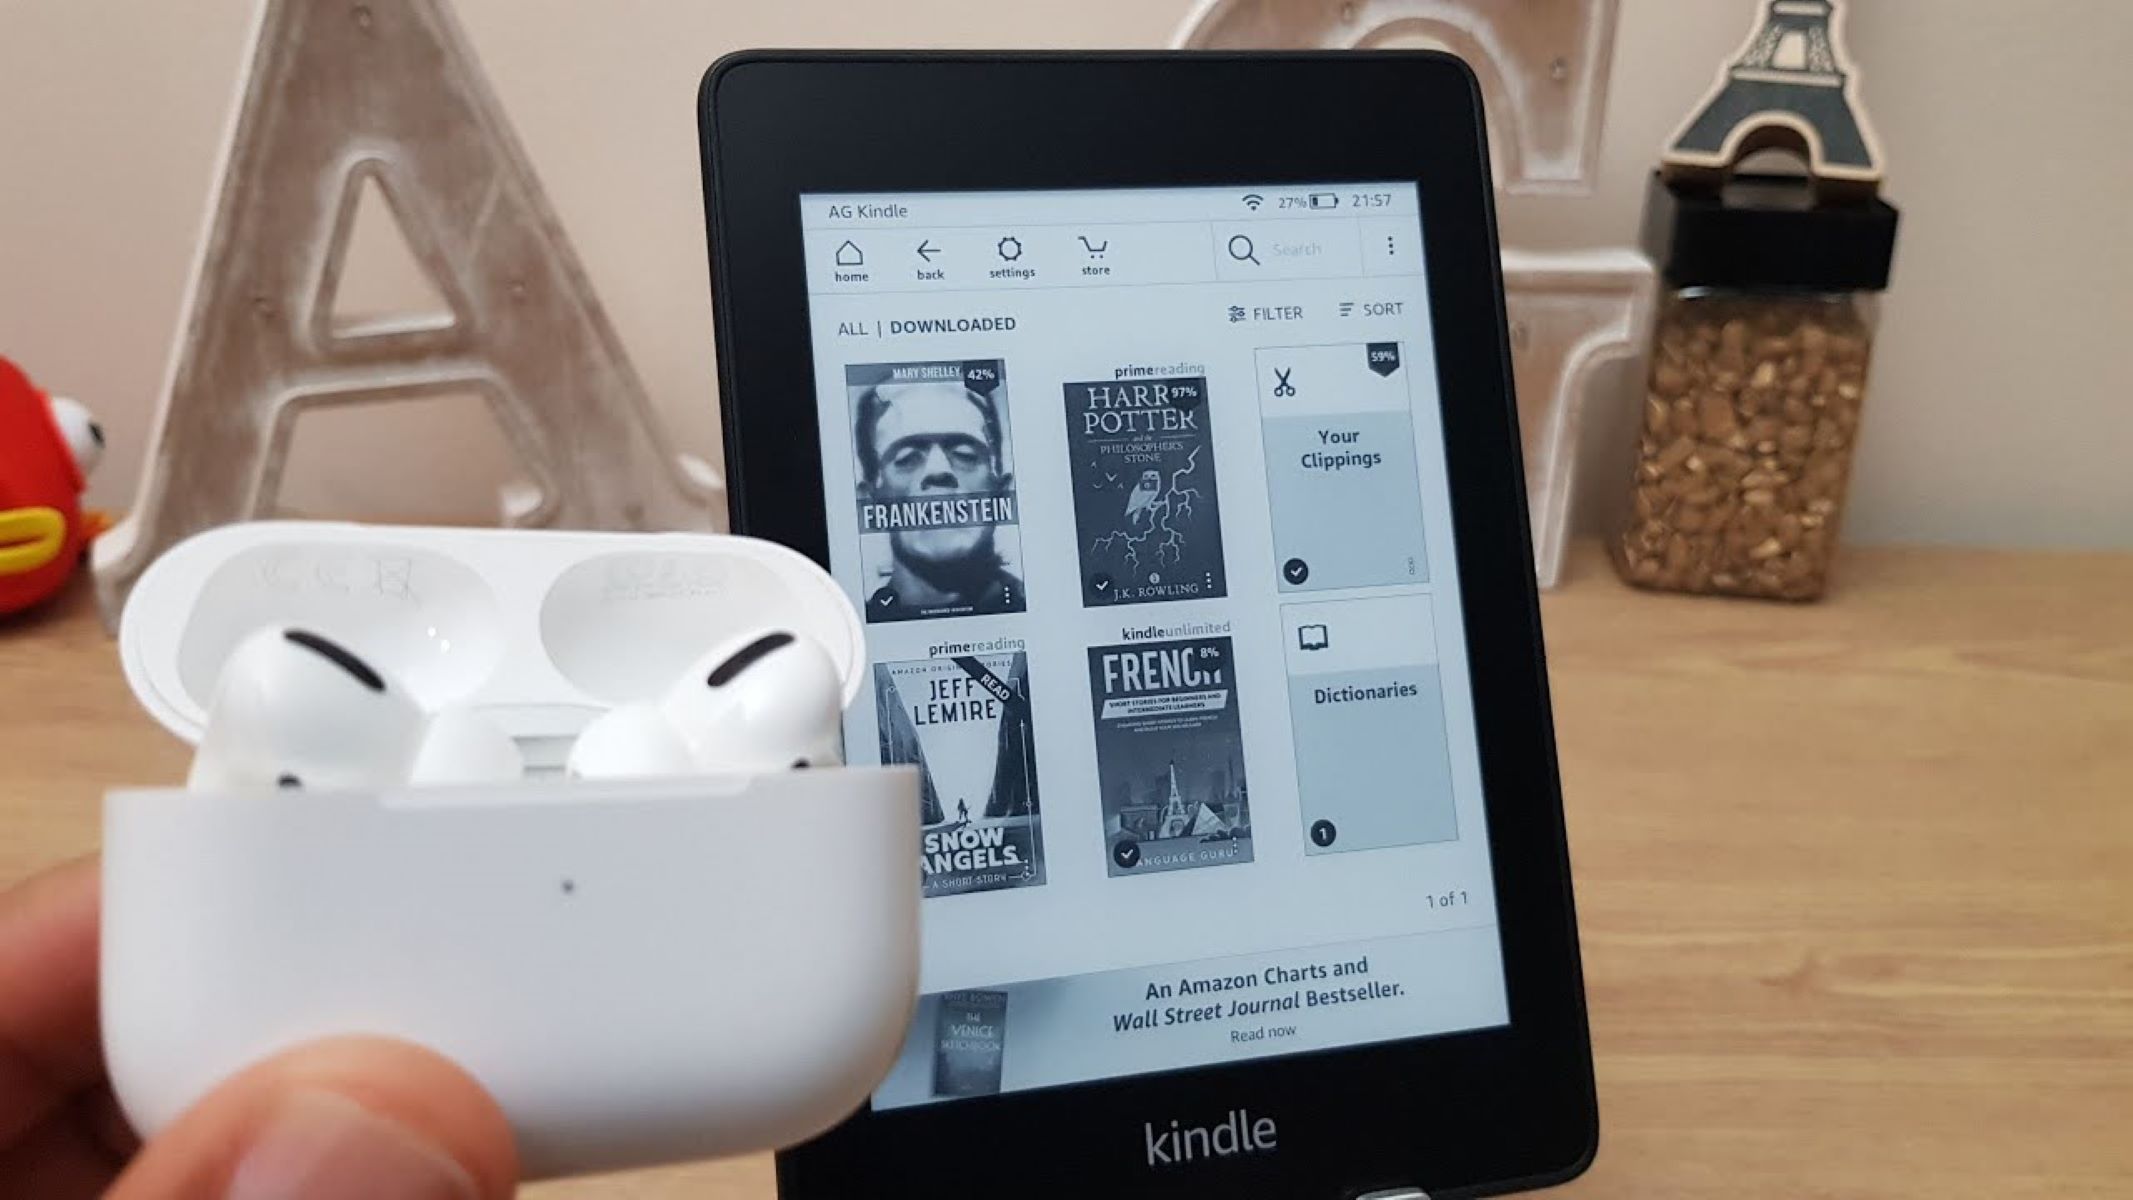 How To Connect Airpods To Kindle Fire